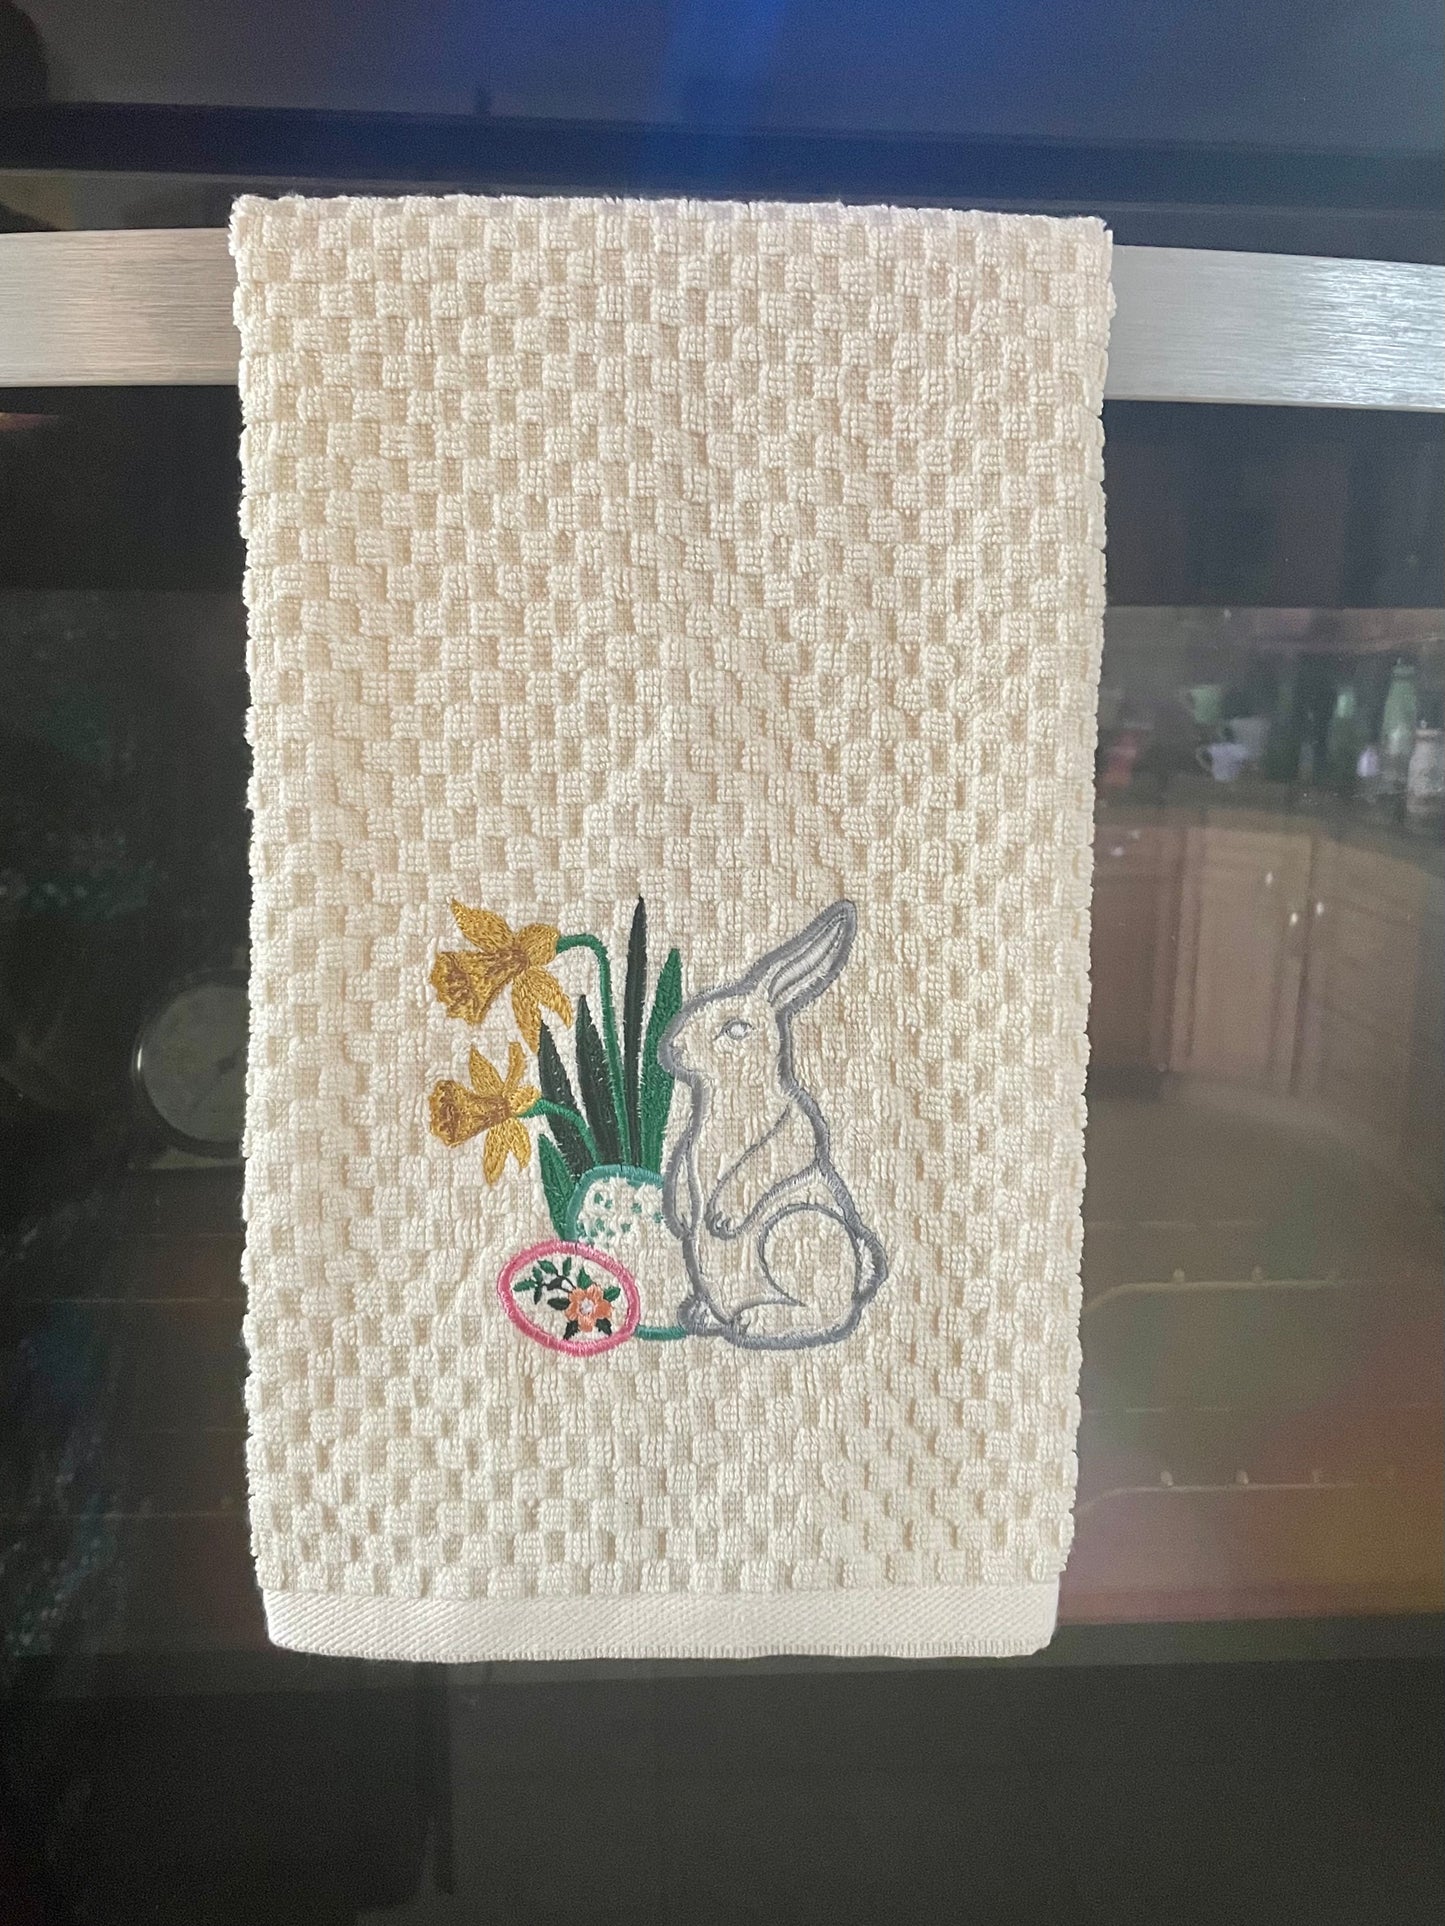 Easter Rabbit with Daffodils Embroidered Towel. Embroidered on Kitchen or Guest Bath Hand Towels